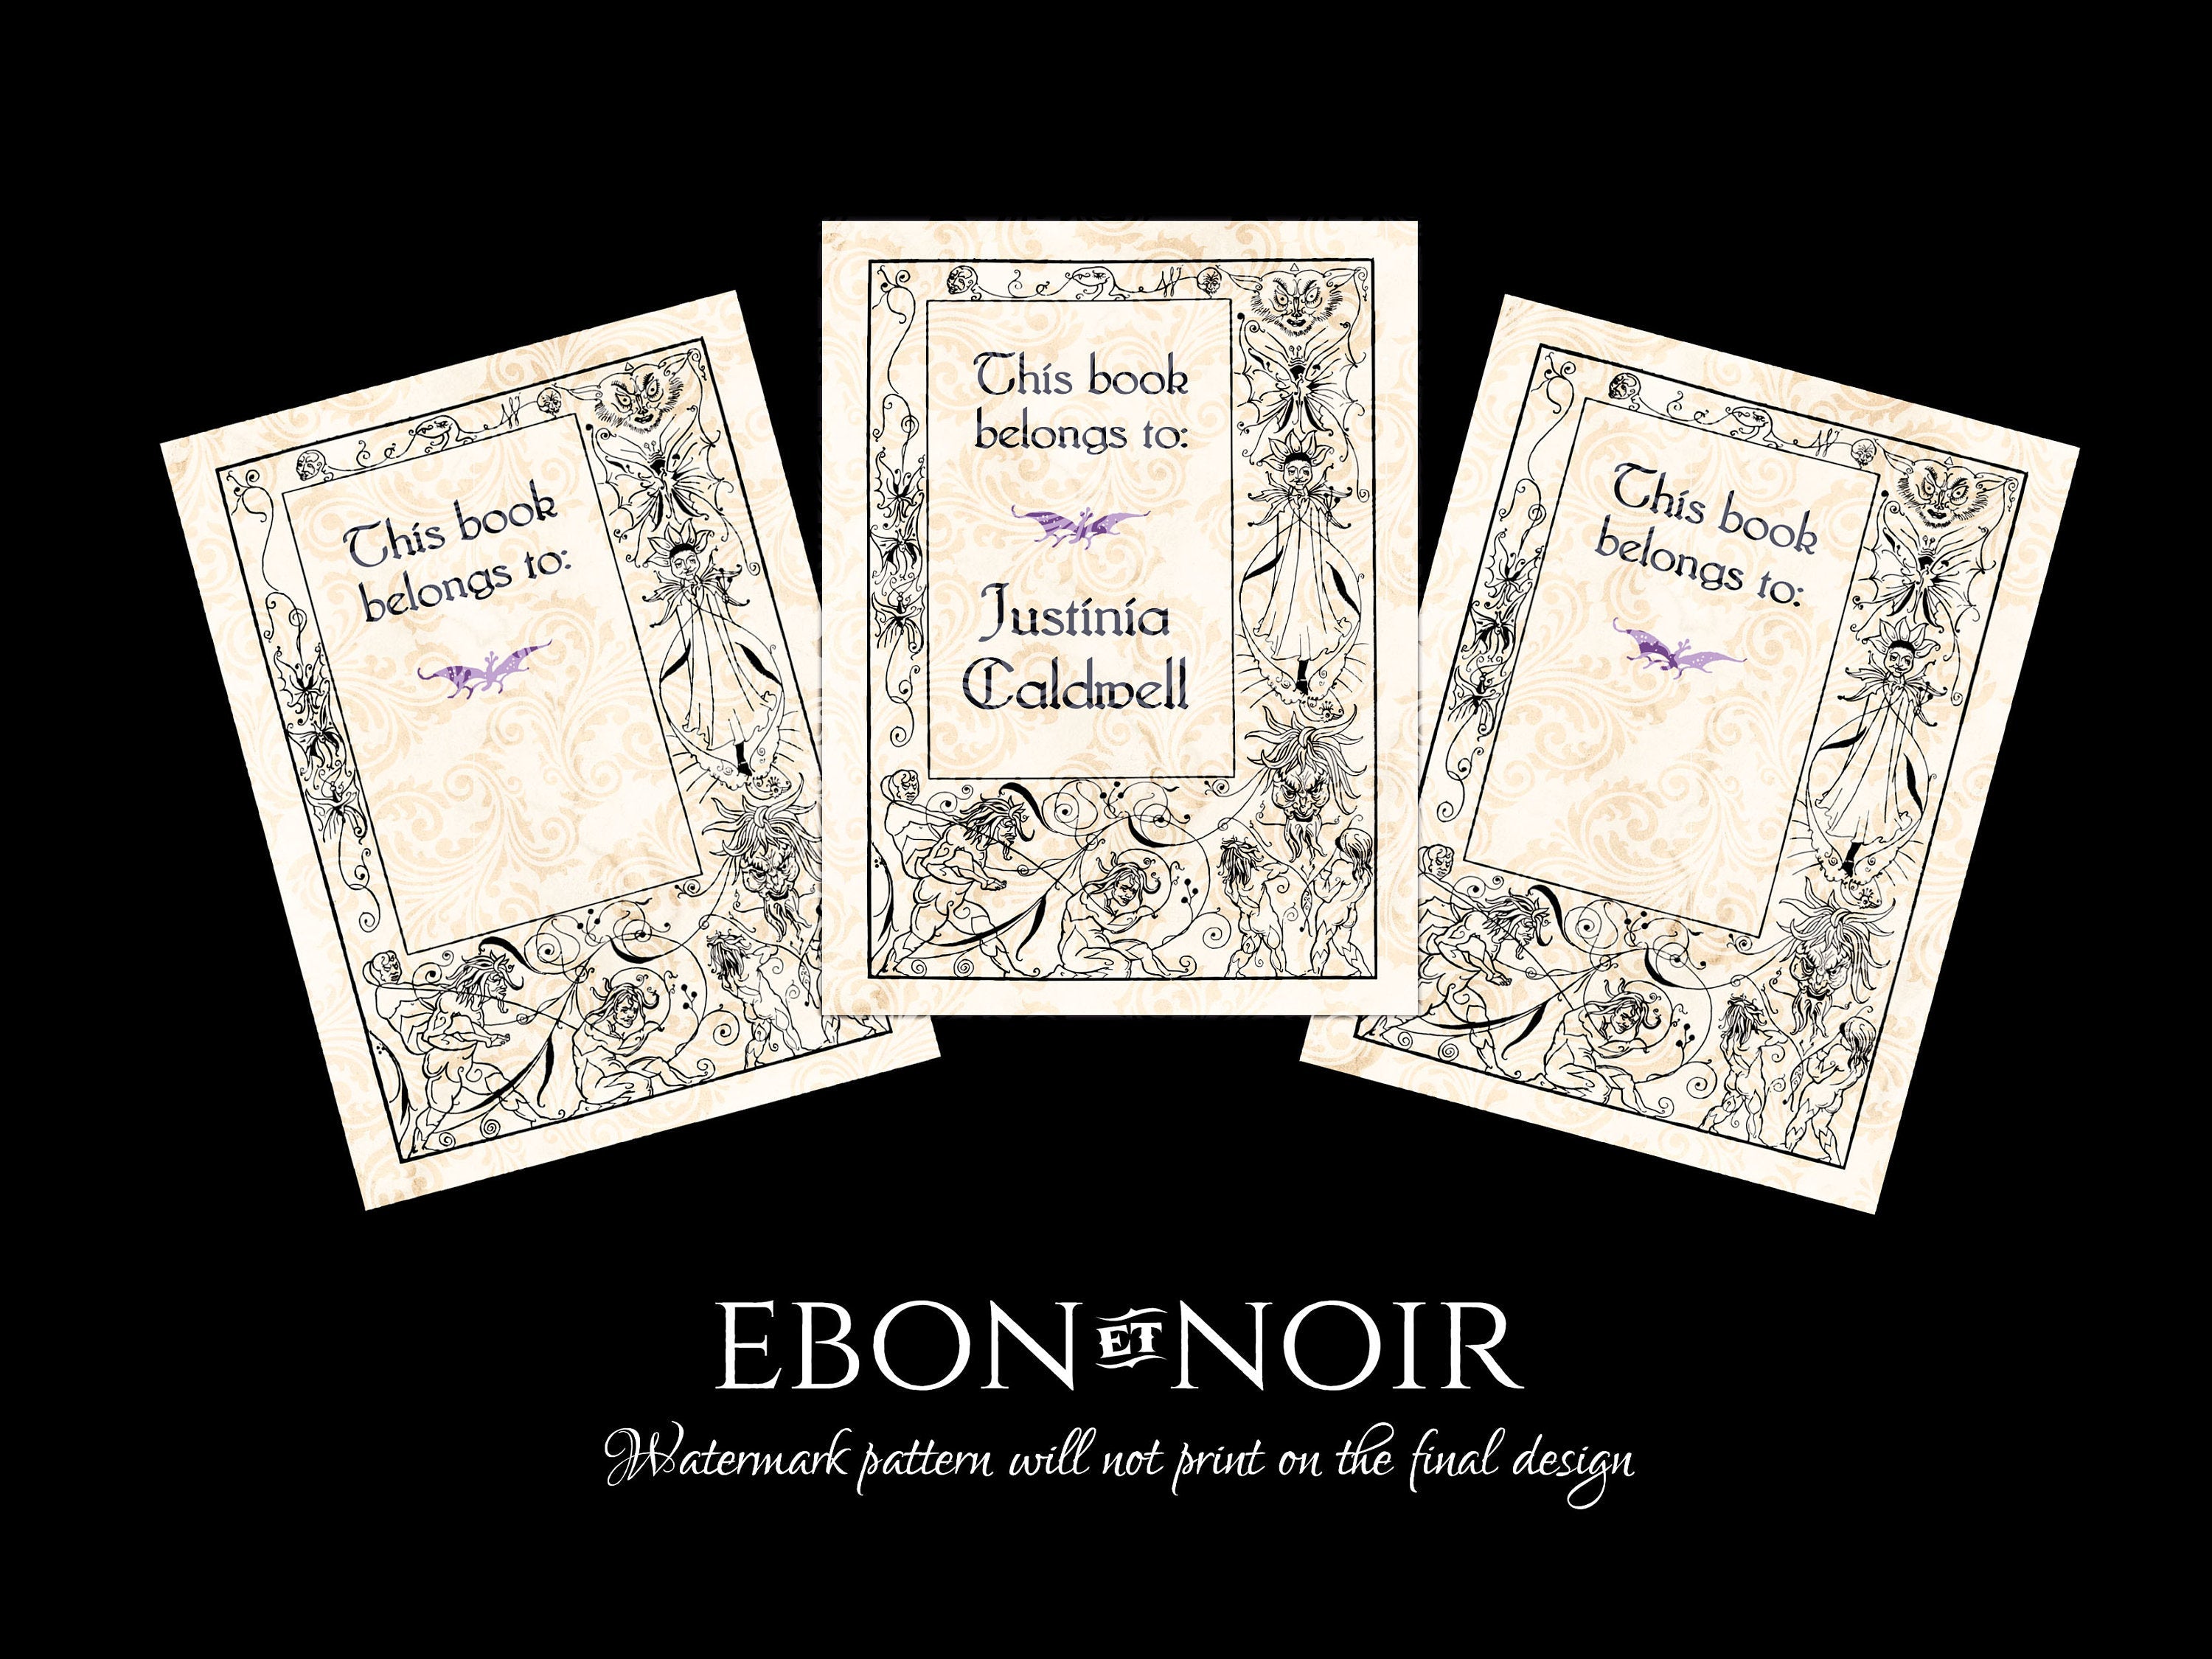 Aubrey Beardsley Fairies, Personalized, Ex-Libris Bookplates, Crafted on Traditional Gummed Paper, 3in x 4in, Set of 30